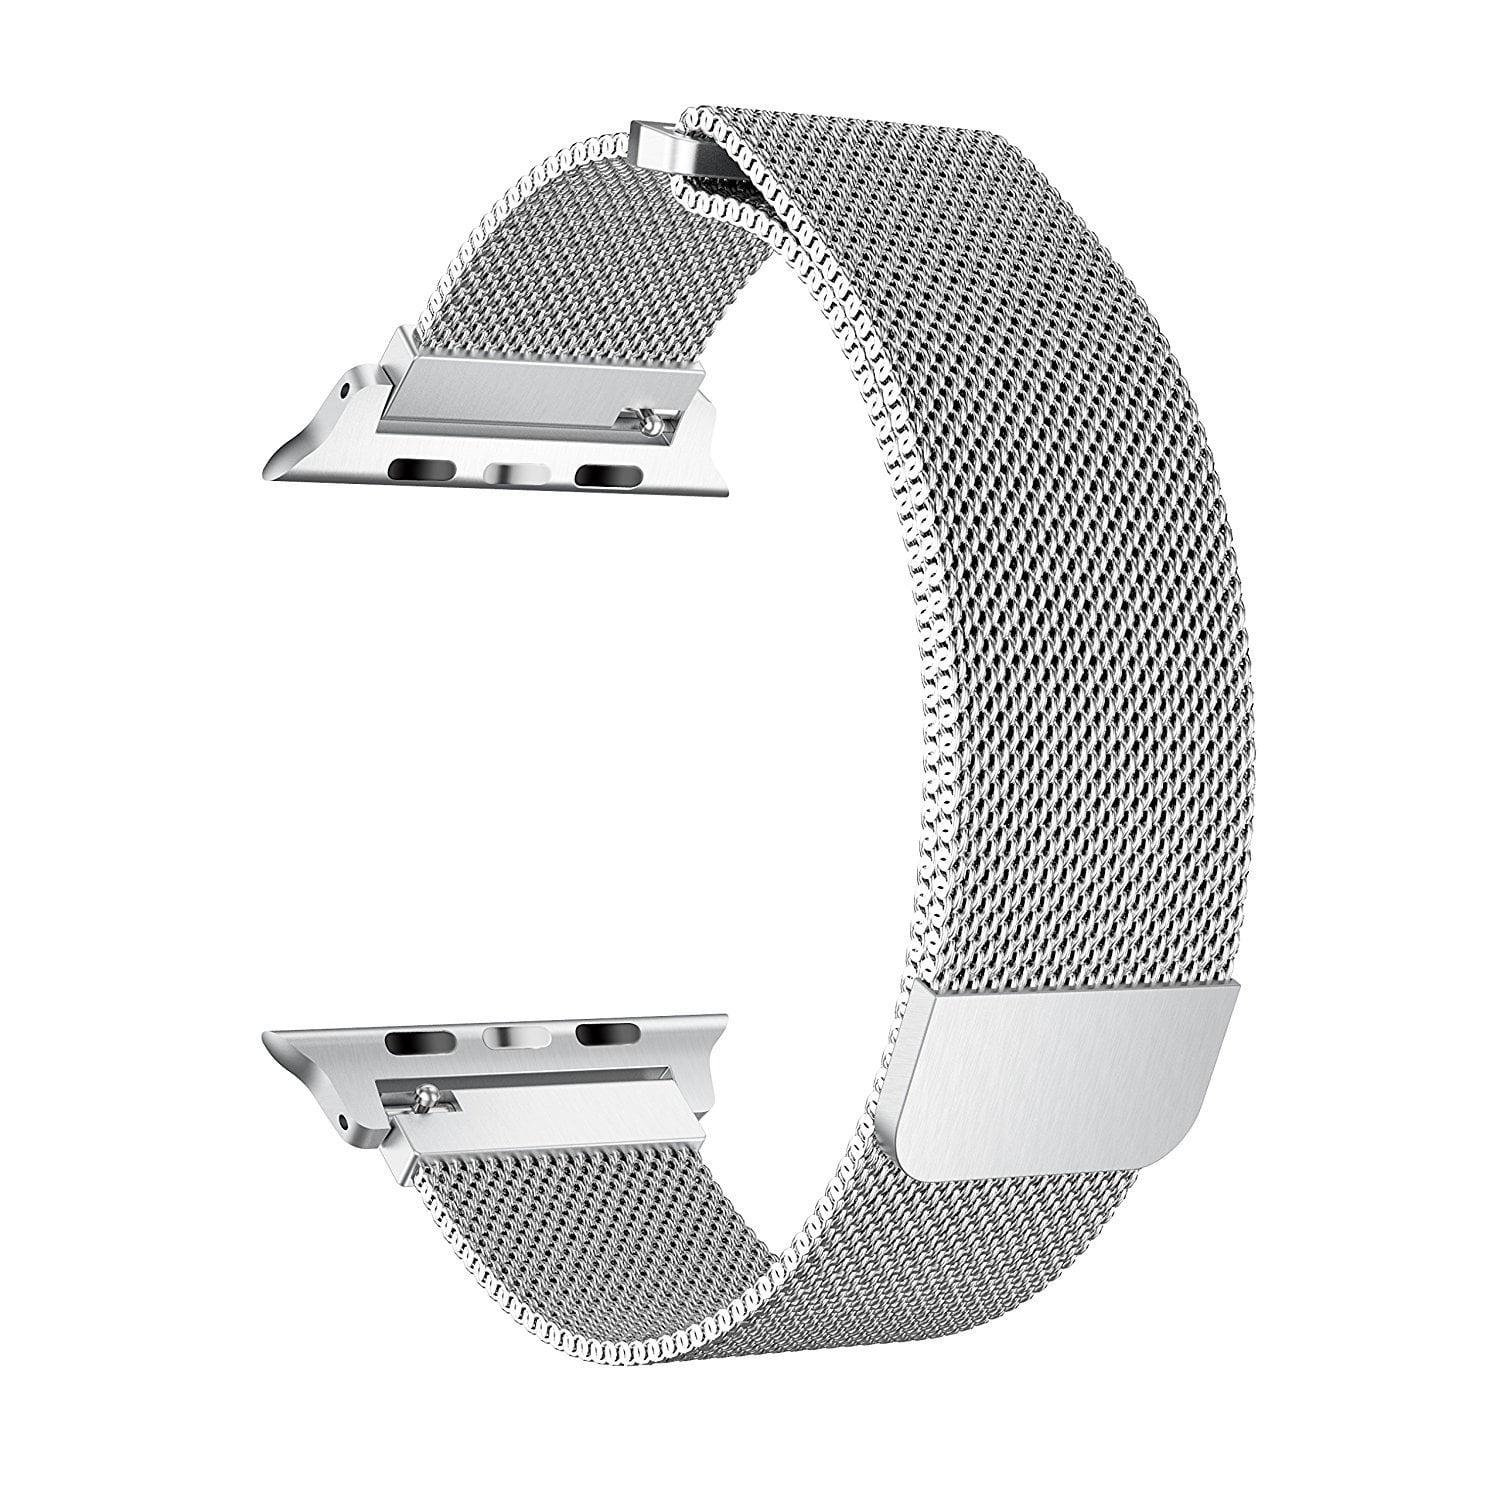 apple watch 3 silver band